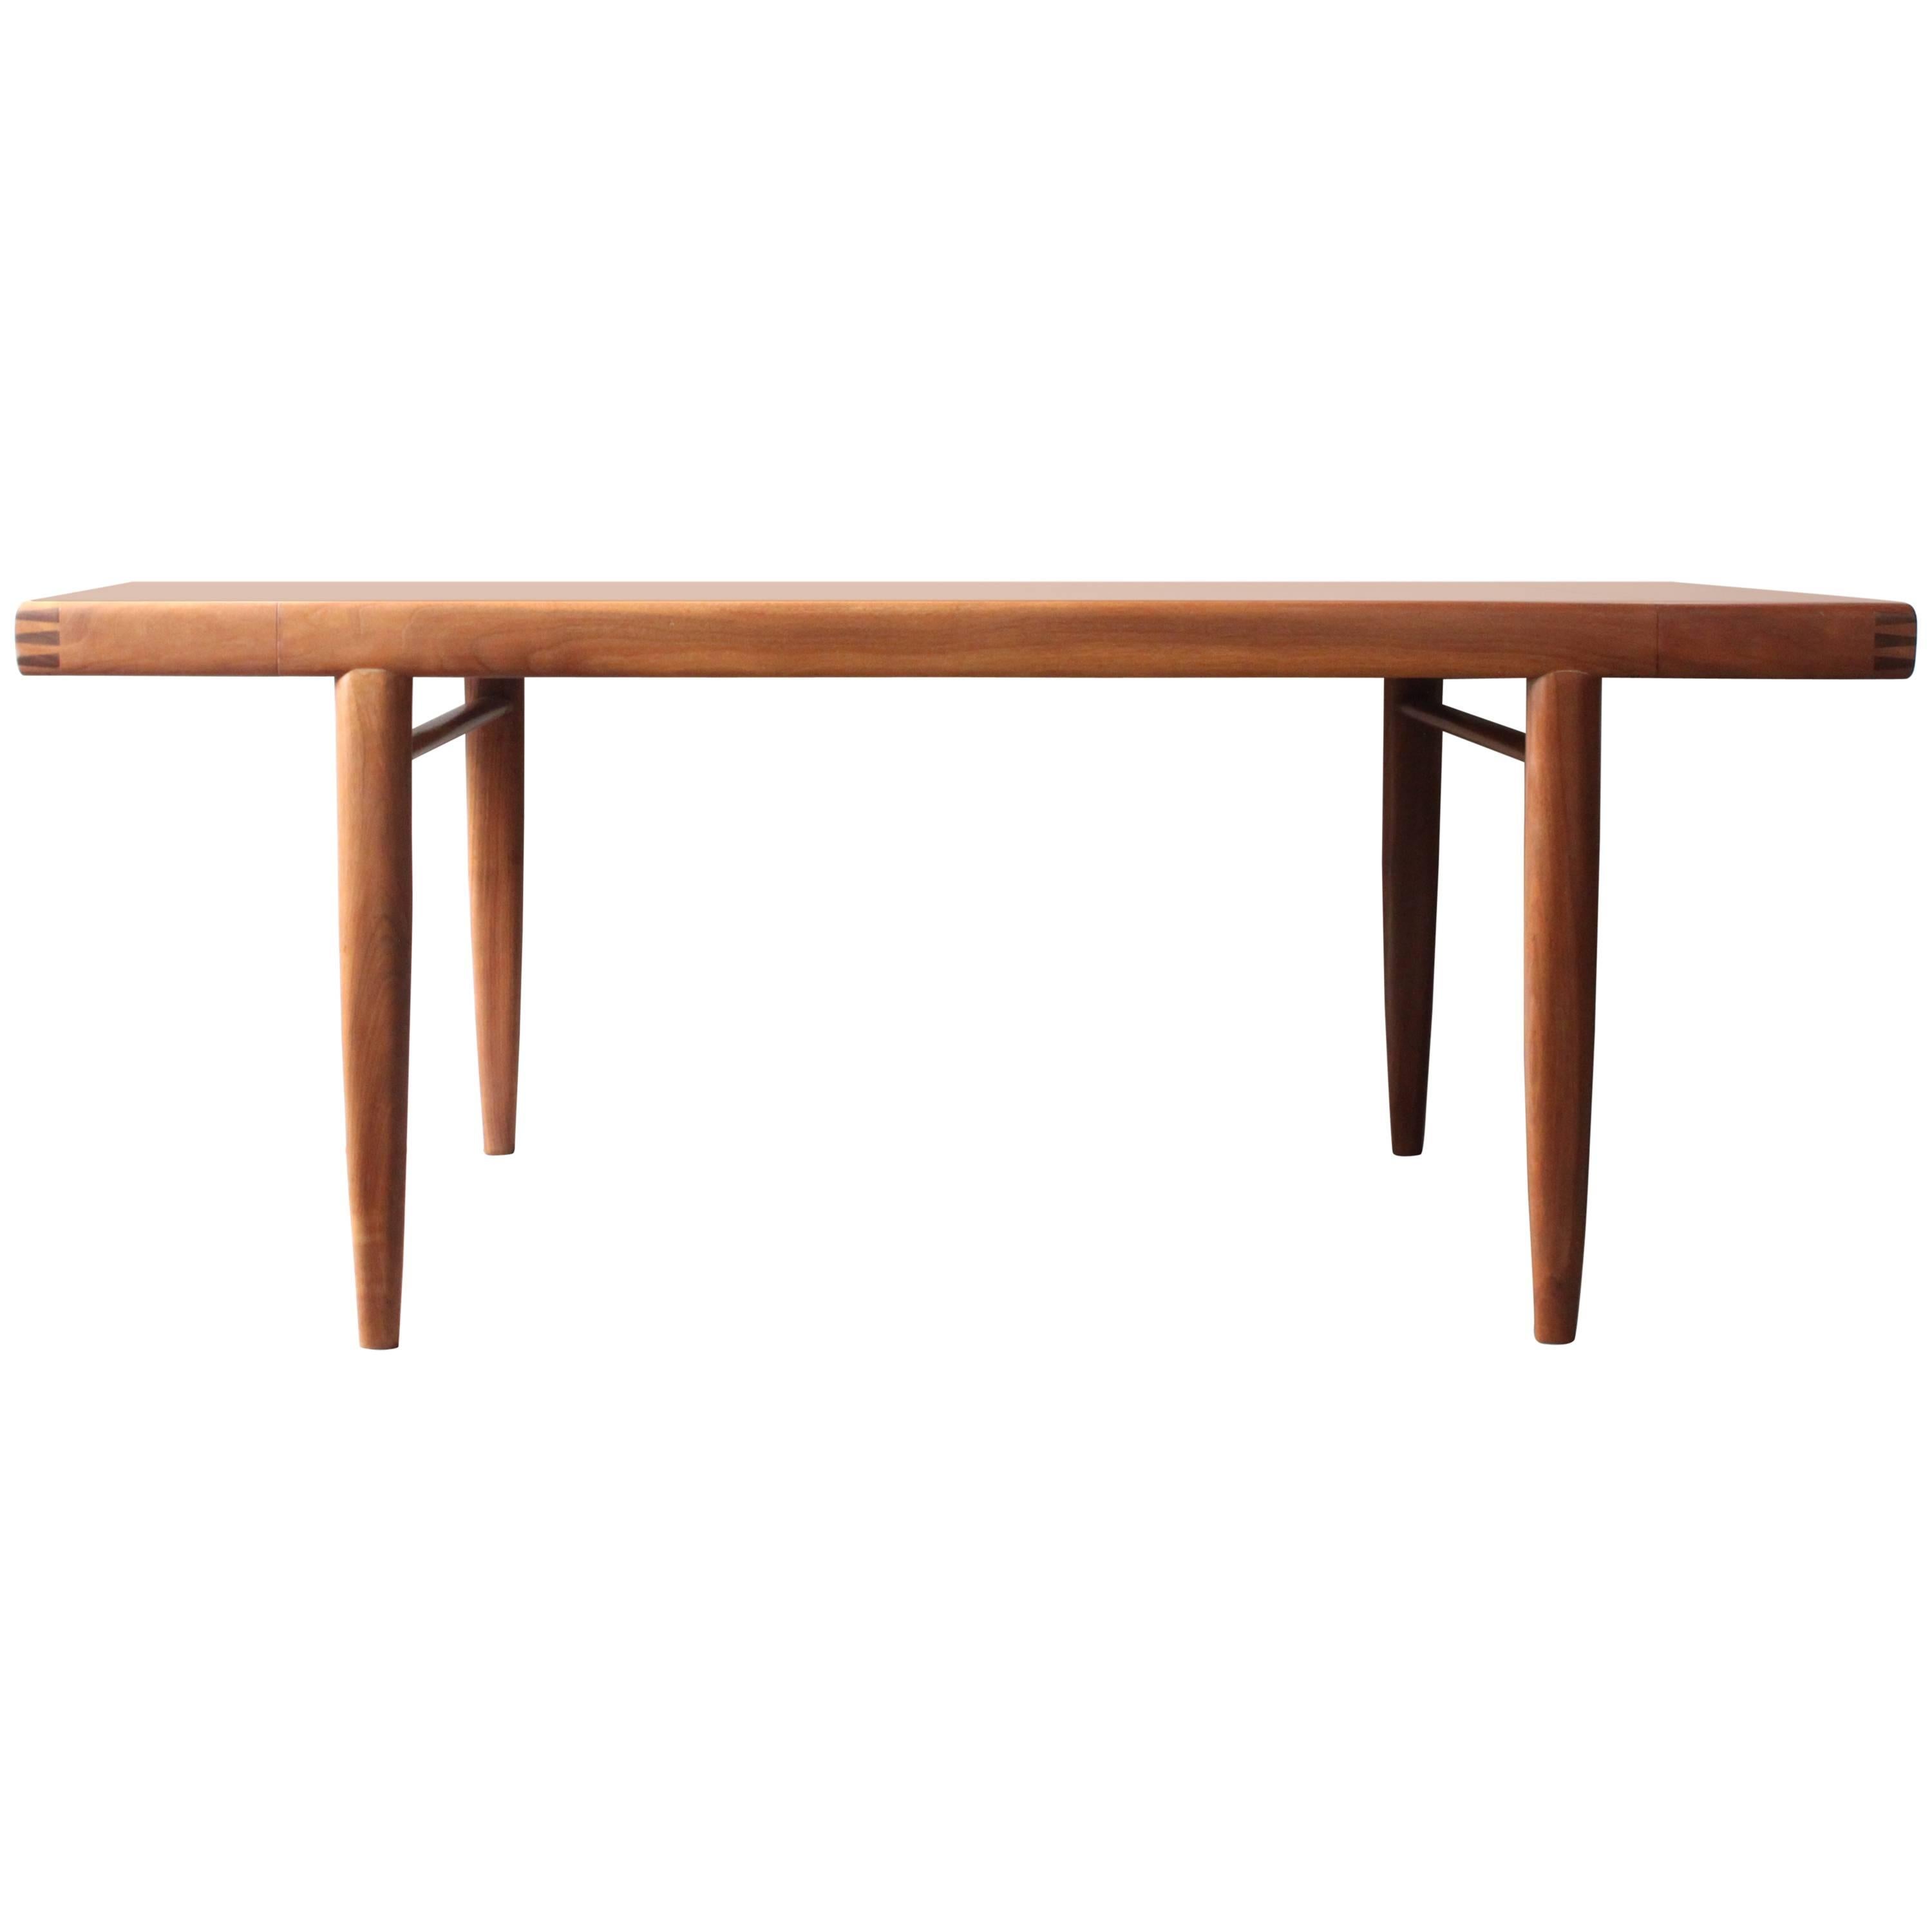 Walnut Dining Table by George Nakashima for Widdicomb